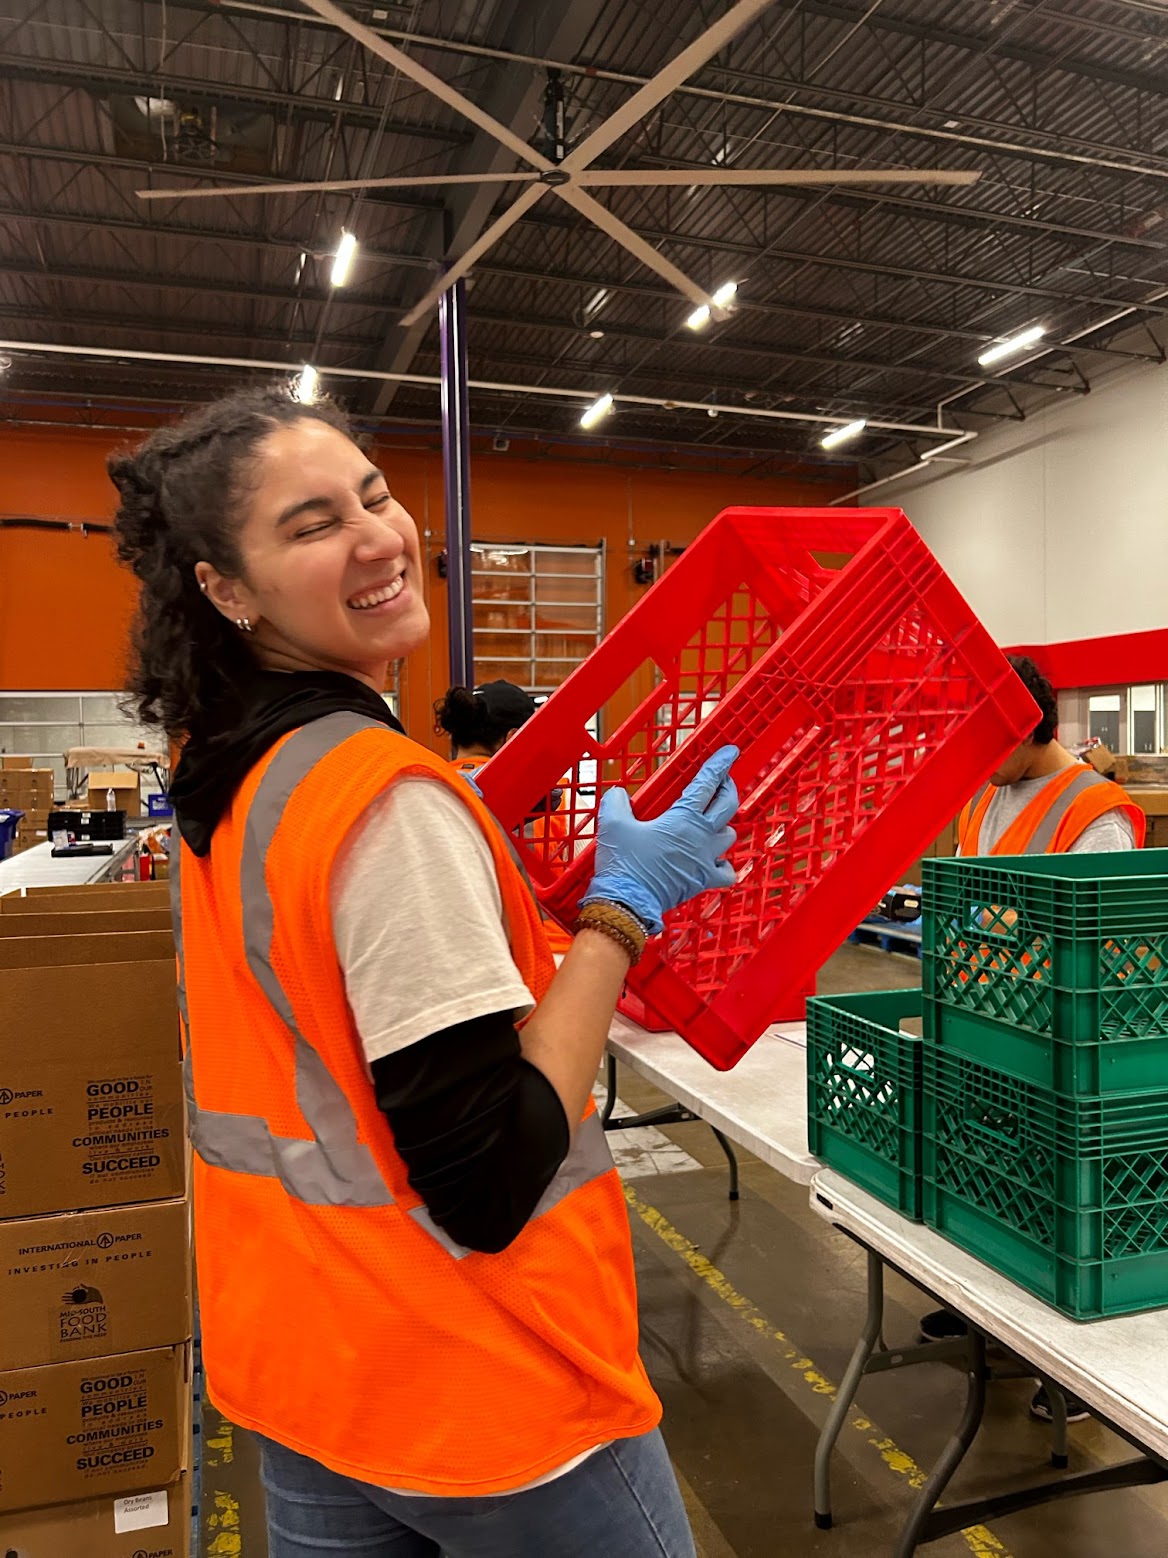 A woman holding an orange crate in a warehouse during spring break.